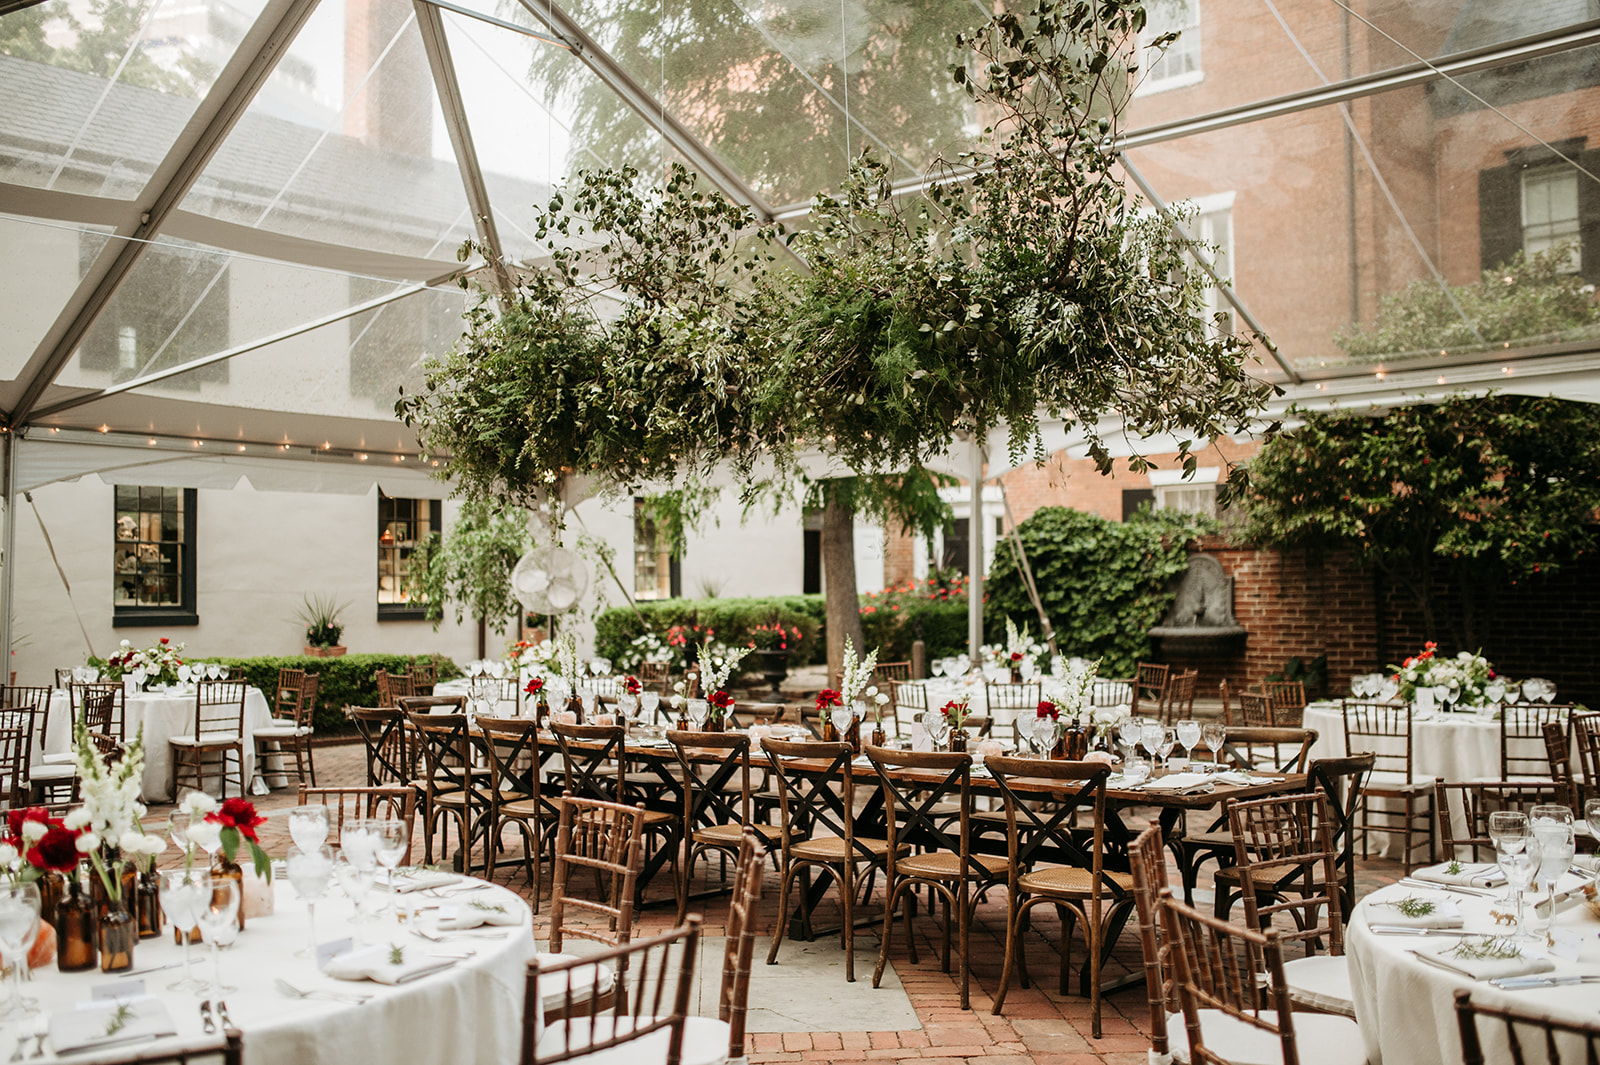 Tent Wedding Reception with Greenery and Red Flowers at Decatur House in Washington, DC